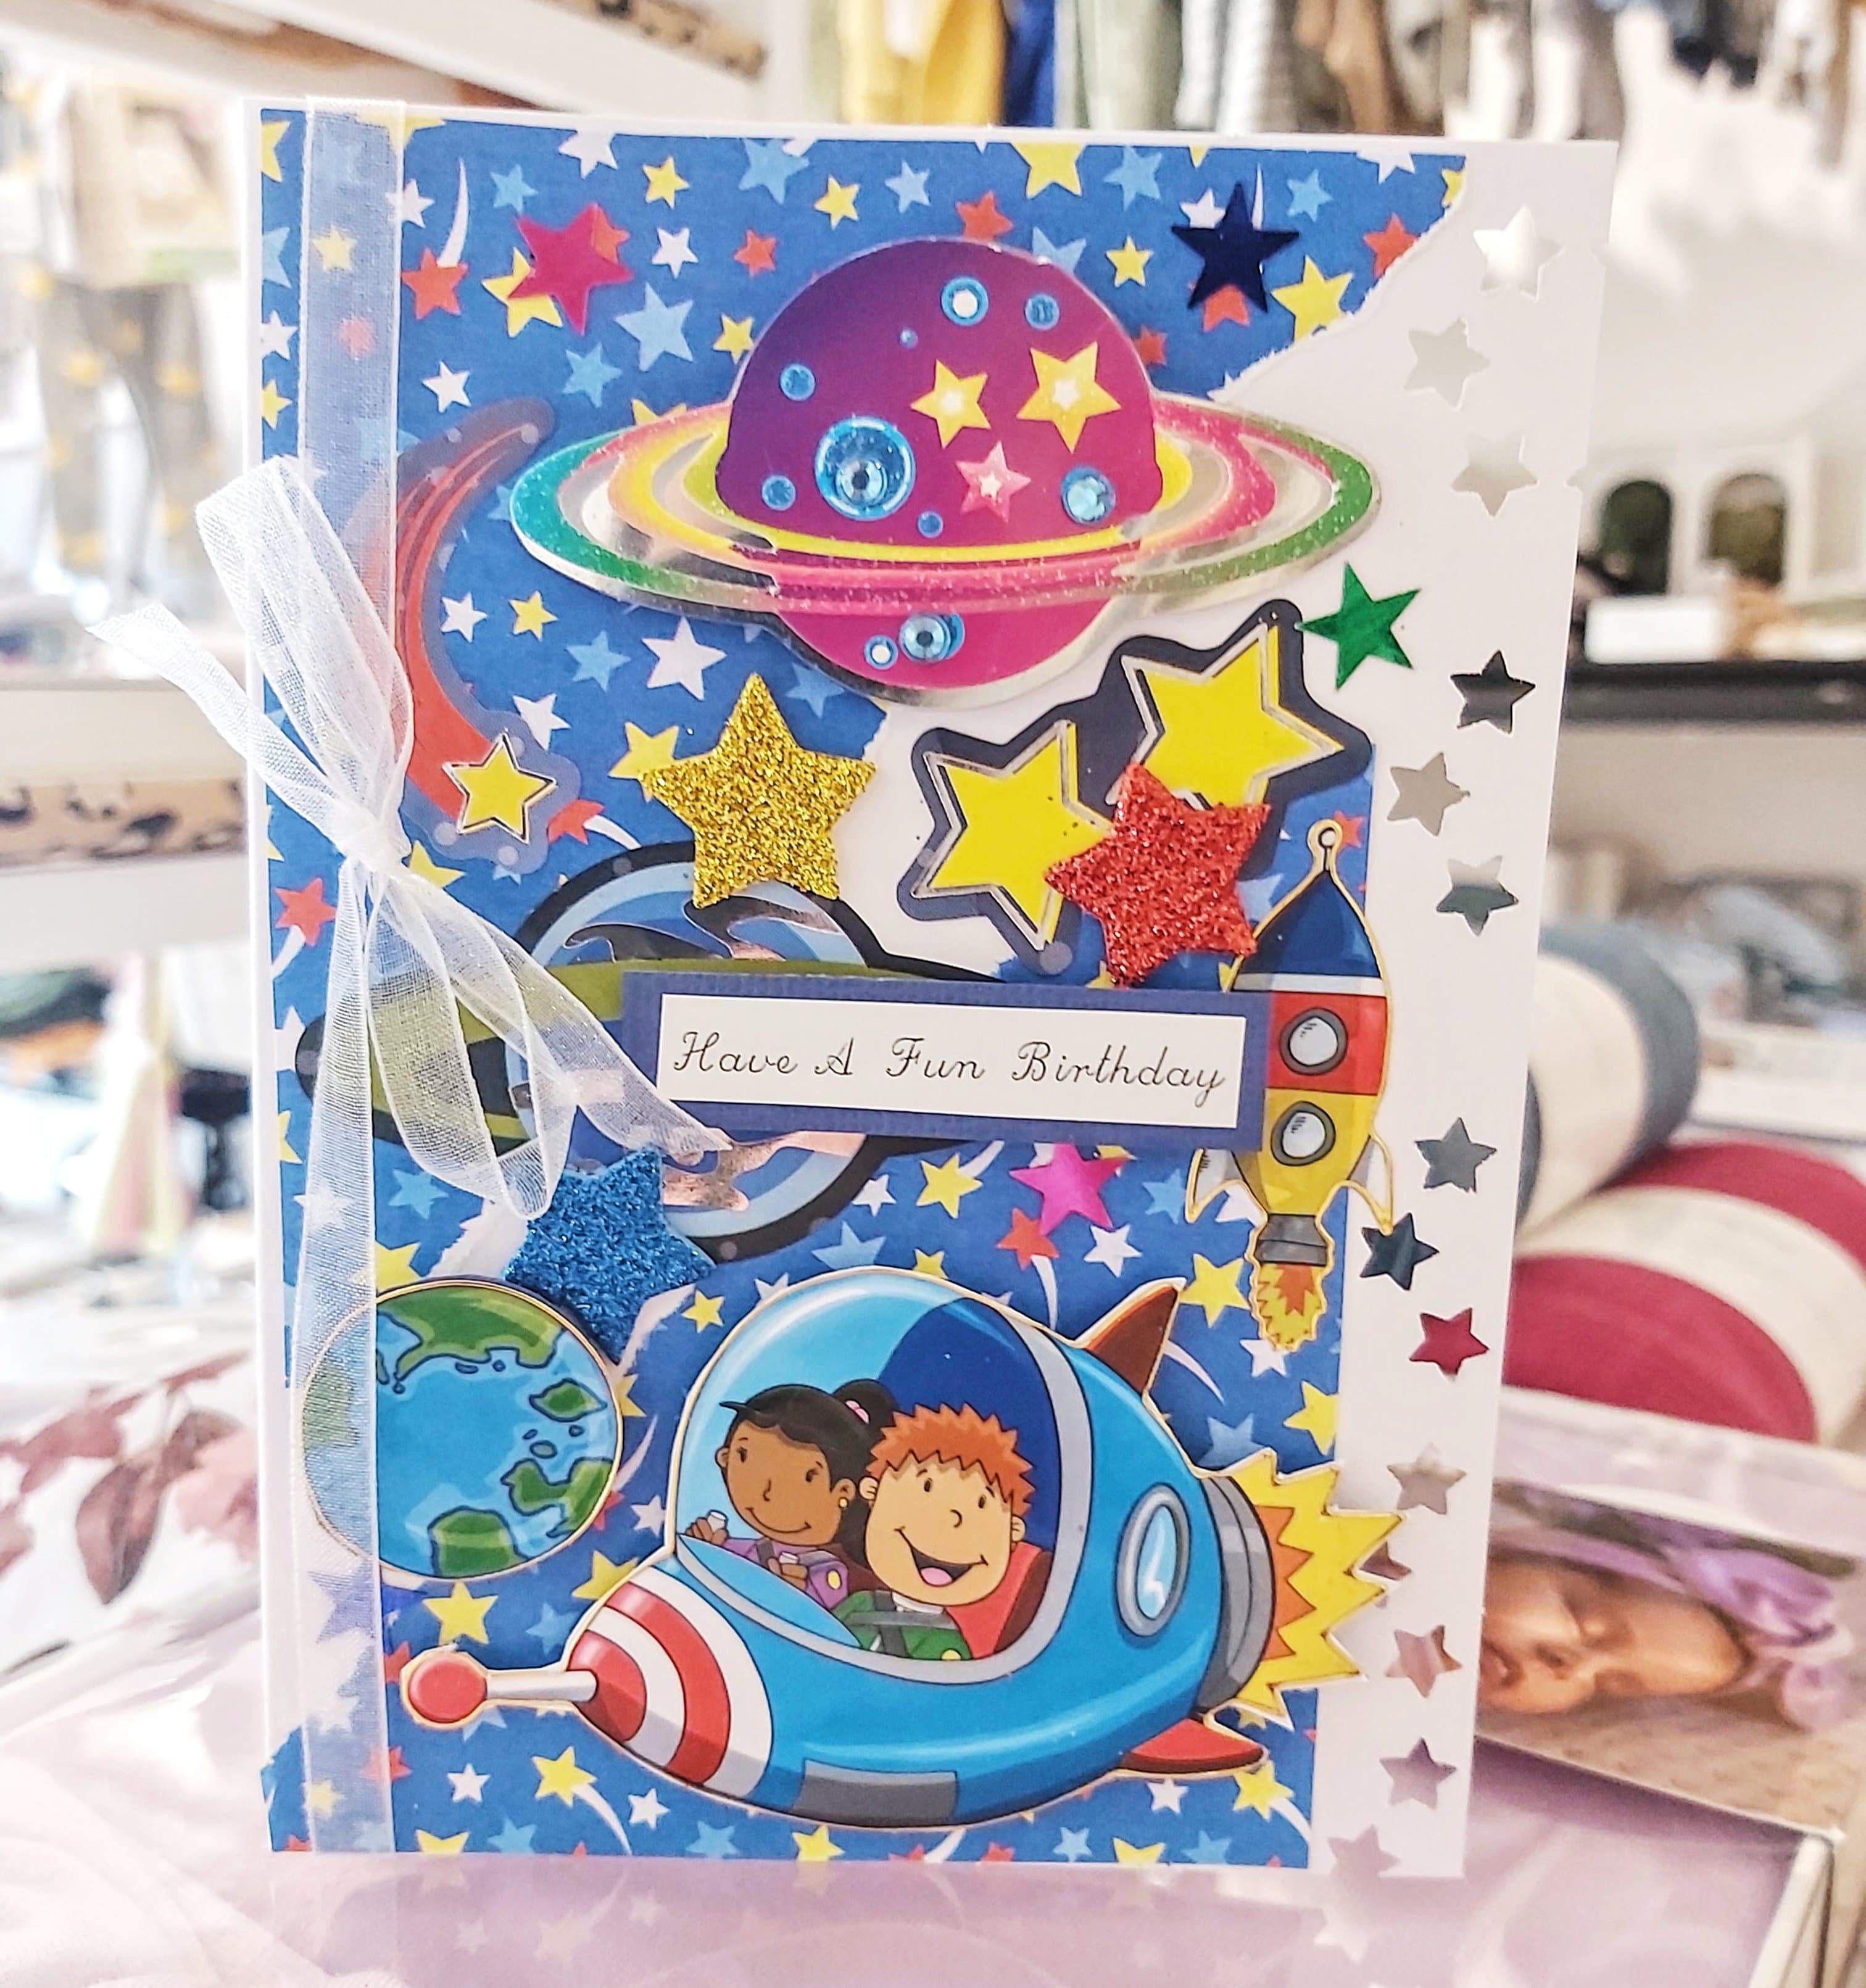 Cards by Trish Childrens Gifts Space Adventures Handmade Gift Card